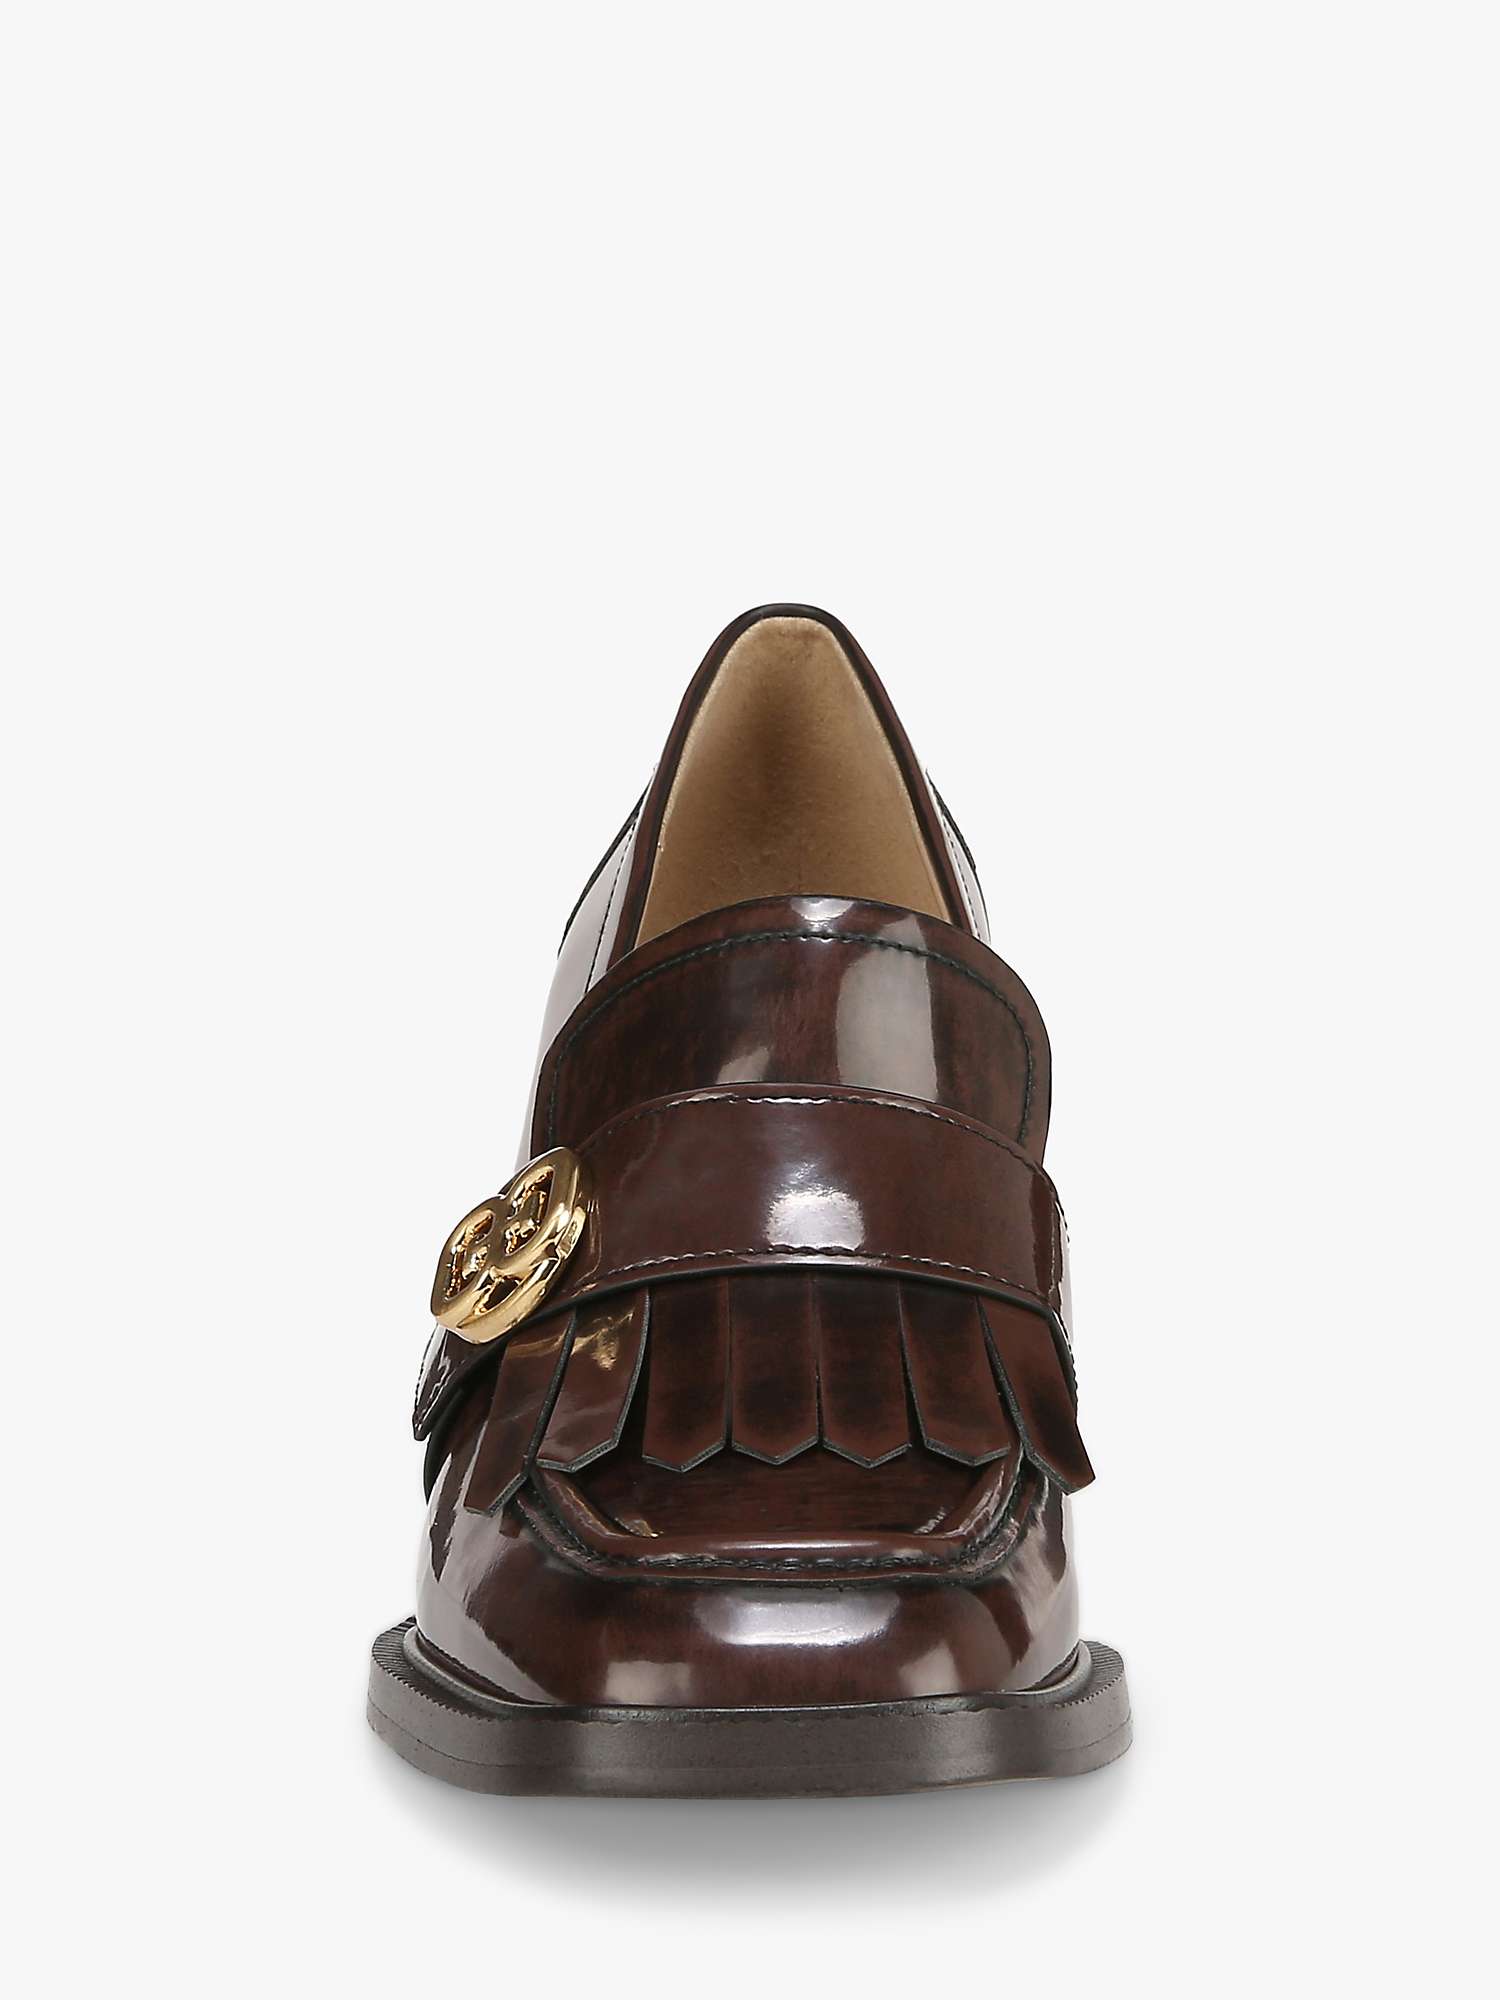 Buy Sam Edelman Quinly Heeled Loafers Online at johnlewis.com